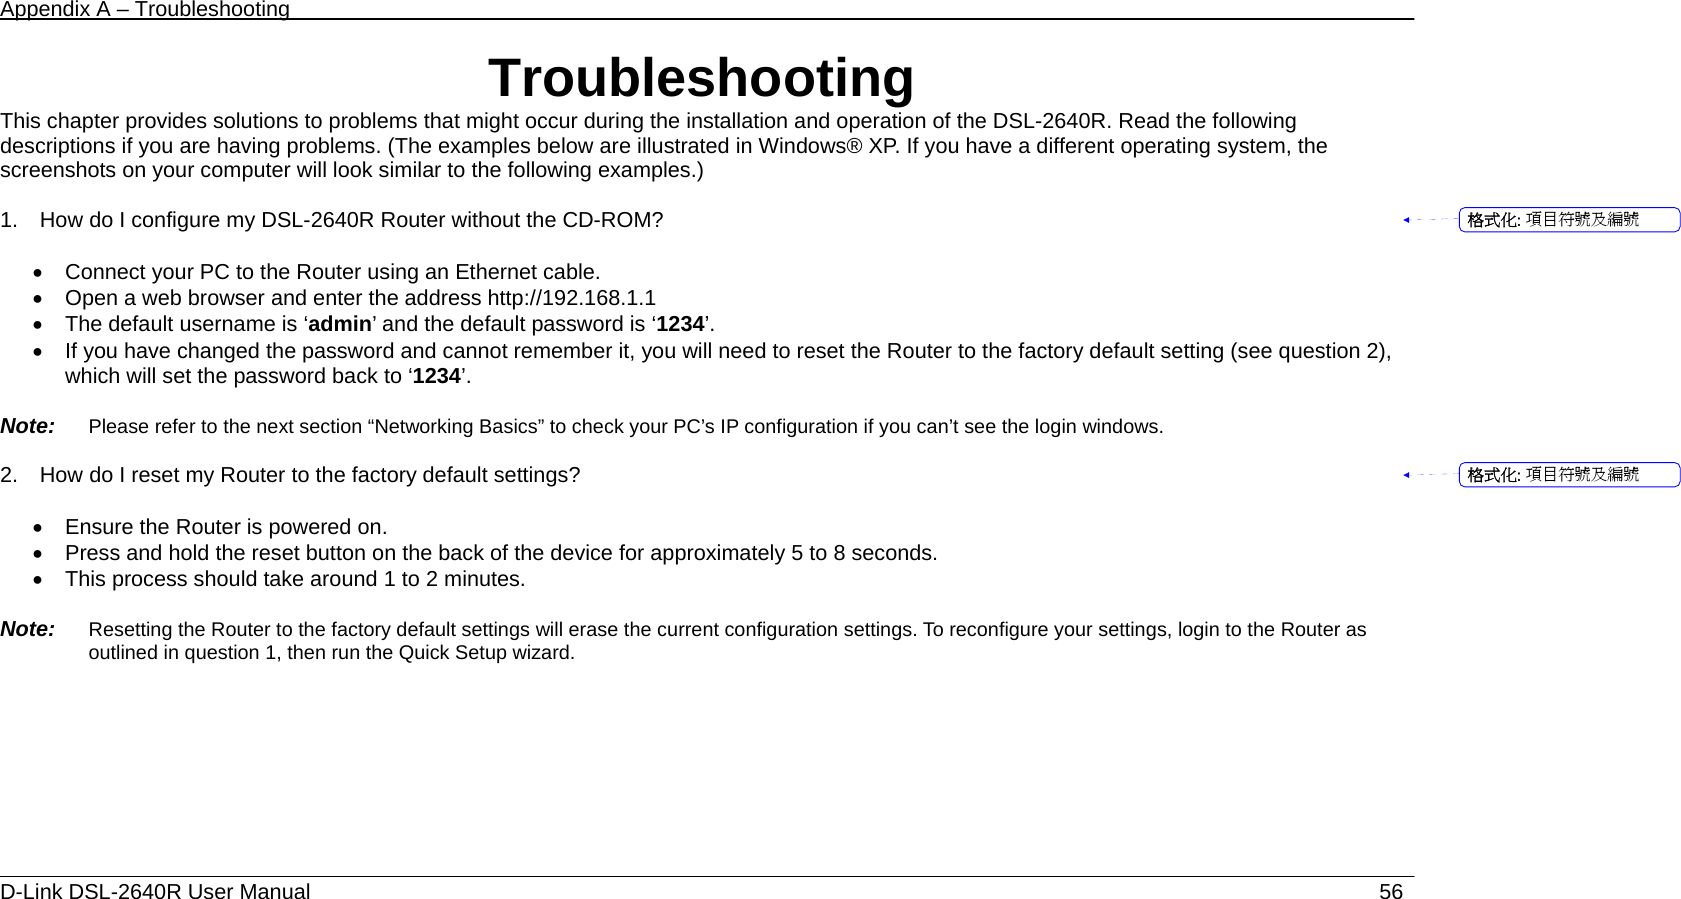 Appendix A – Troubleshooting   D-Link DSL-2640R User Manual                           56Troubleshooting This chapter provides solutions to problems that might occur during the installation and operation of the DSL-2640R. Read the following descriptions if you are having problems. (The examples below are illustrated in Windows® XP. If you have a different operating system, the screenshots on your computer will look similar to the following examples.)  1.    How do I configure my DSL-2640R Router without the CD-ROM?  •  Connect your PC to the Router using an Ethernet cable. •  Open a web browser and enter the address http://192.168.1.1 •  The default username is ‘admin’ and the default password is ‘1234’. •  If you have changed the password and cannot remember it, you will need to reset the Router to the factory default setting (see question 2), which will set the password back to ‘1234’.  Note:   Please refer to the next section “Networking Basics” to check your PC’s IP configuration if you can’t see the login windows.  2.    How do I reset my Router to the factory default settings?  •  Ensure the Router is powered on. •  Press and hold the reset button on the back of the device for approximately 5 to 8 seconds. •  This process should take around 1 to 2 minutes.    Note:   Resetting the Router to the factory default settings will erase the current configuration settings. To reconfigure your settings, login to the Router as outlined in question 1, then run the Quick Setup wizard.         格式化: 項目符號及編號格式化: 項目符號及編號